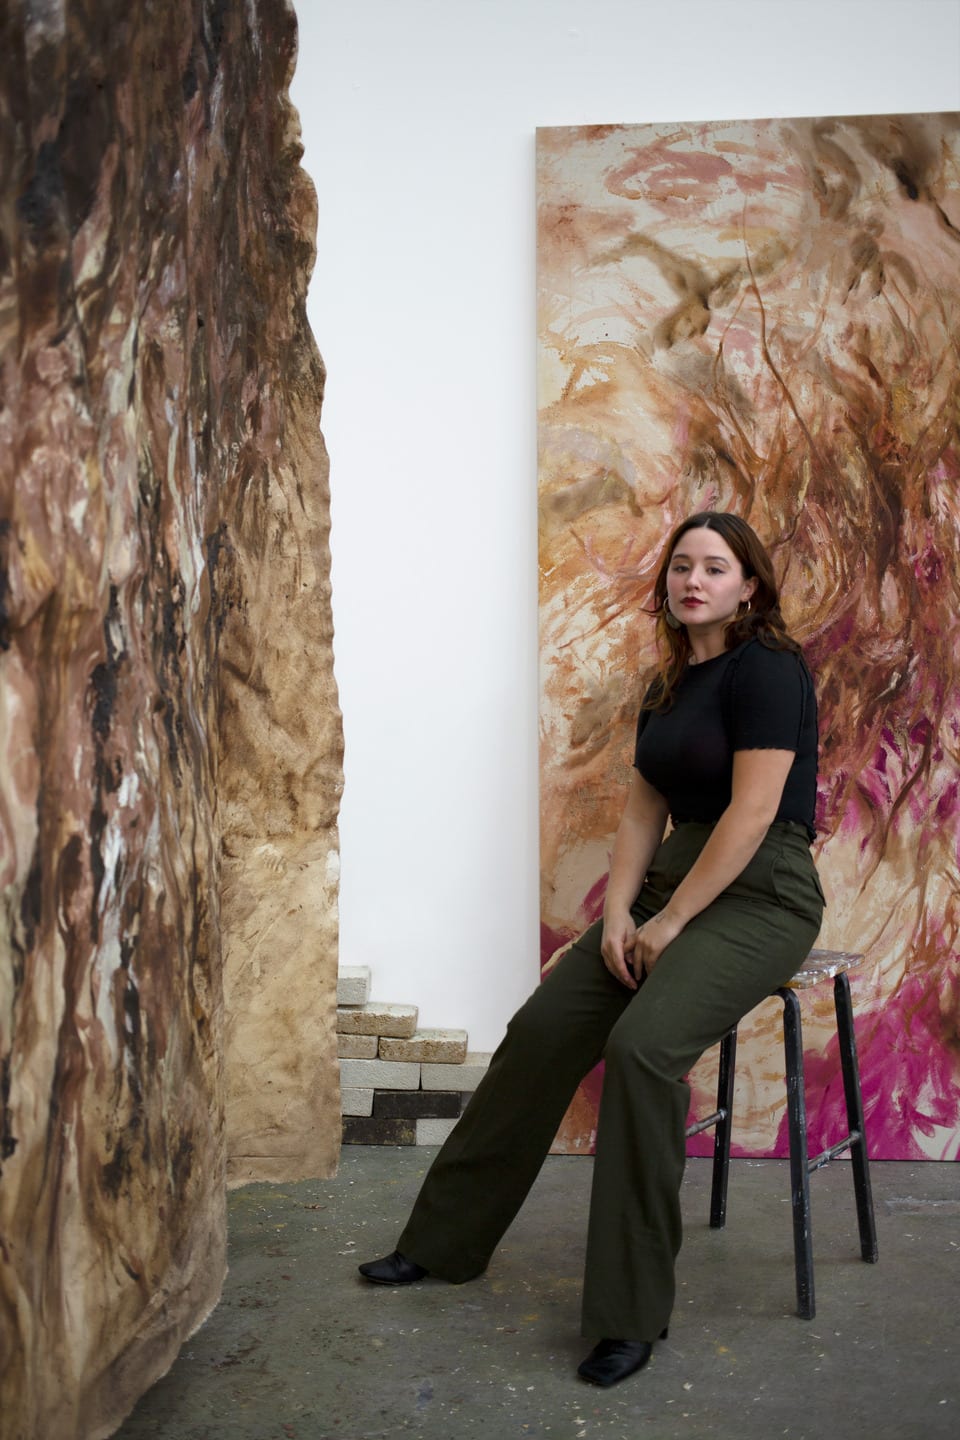 Julia Bennett sitting on a stool in front of her paintings in the studio